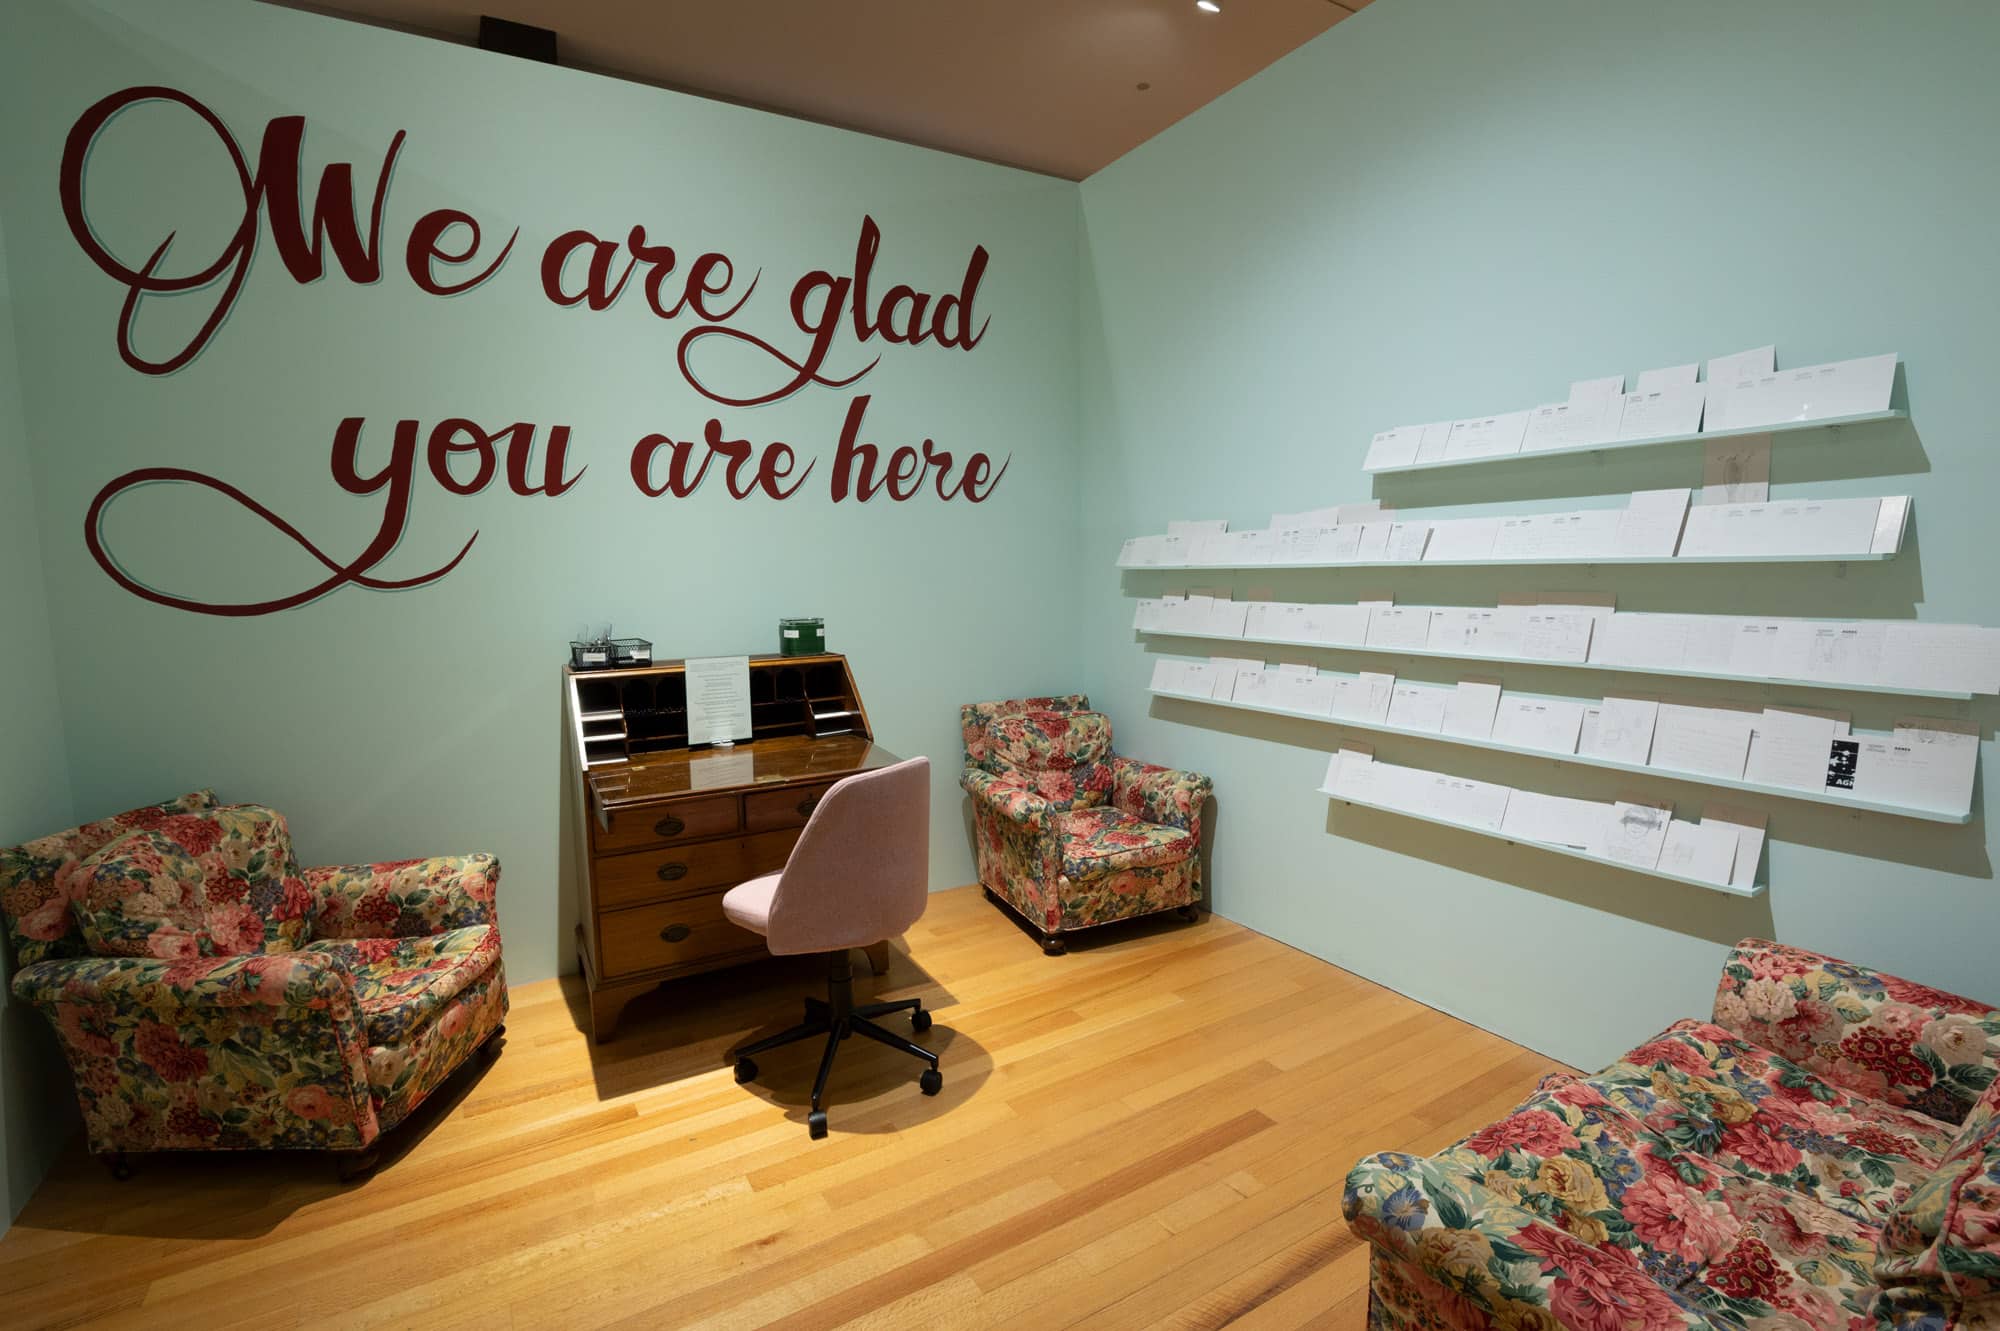 A room with a desk and desk chair, two armchairs, and a love seat. The text “We are glad you are here” is written above the desk.